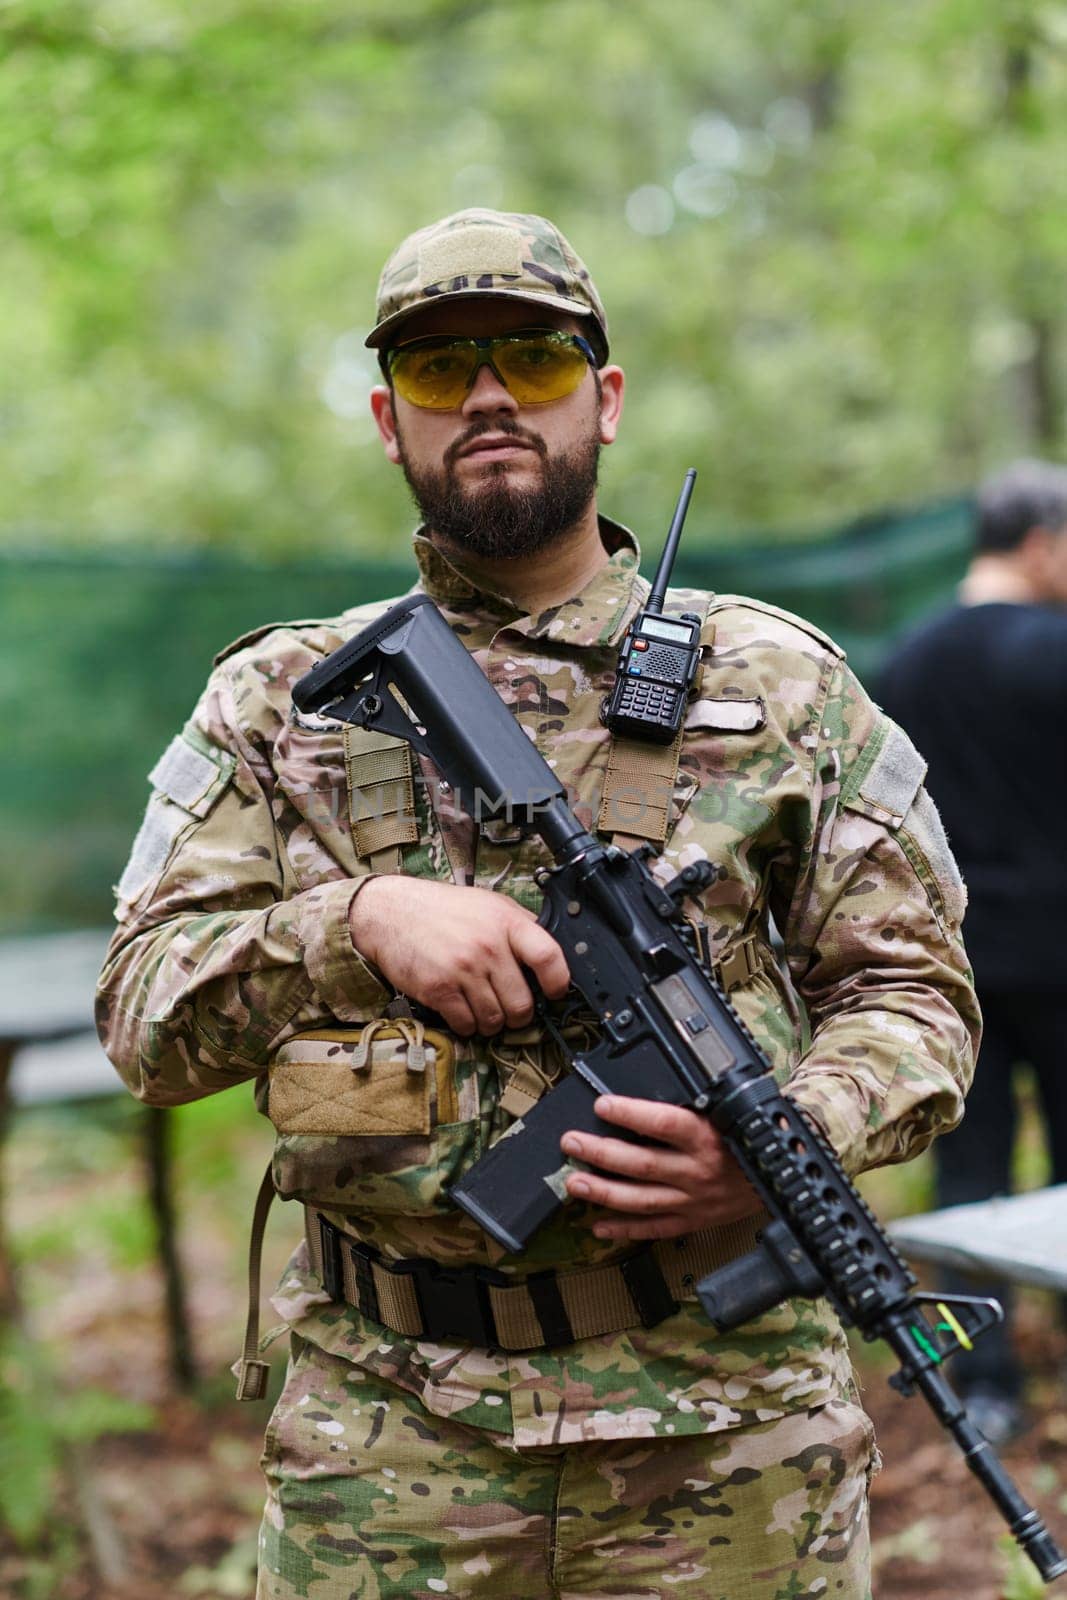 Elite soldier exudes focused determination and readiness, geared up for a perilous military operation, capturing the essence of courage and professionalism in the face of imminent danger.